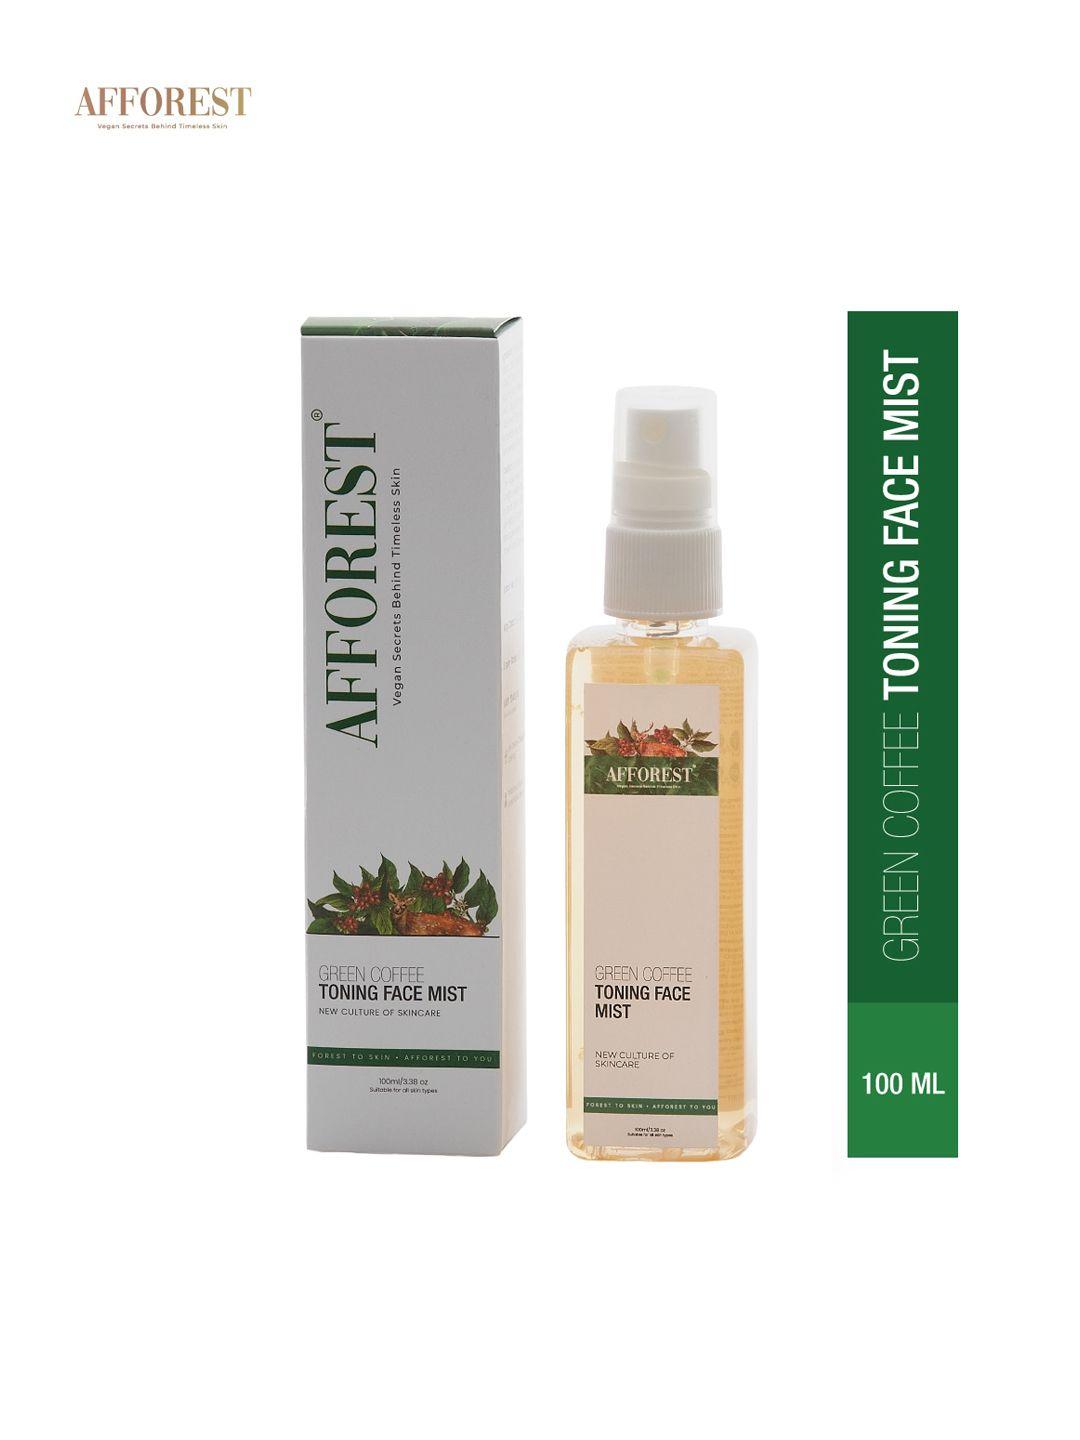 afforest green coffee toning face mist 100ml